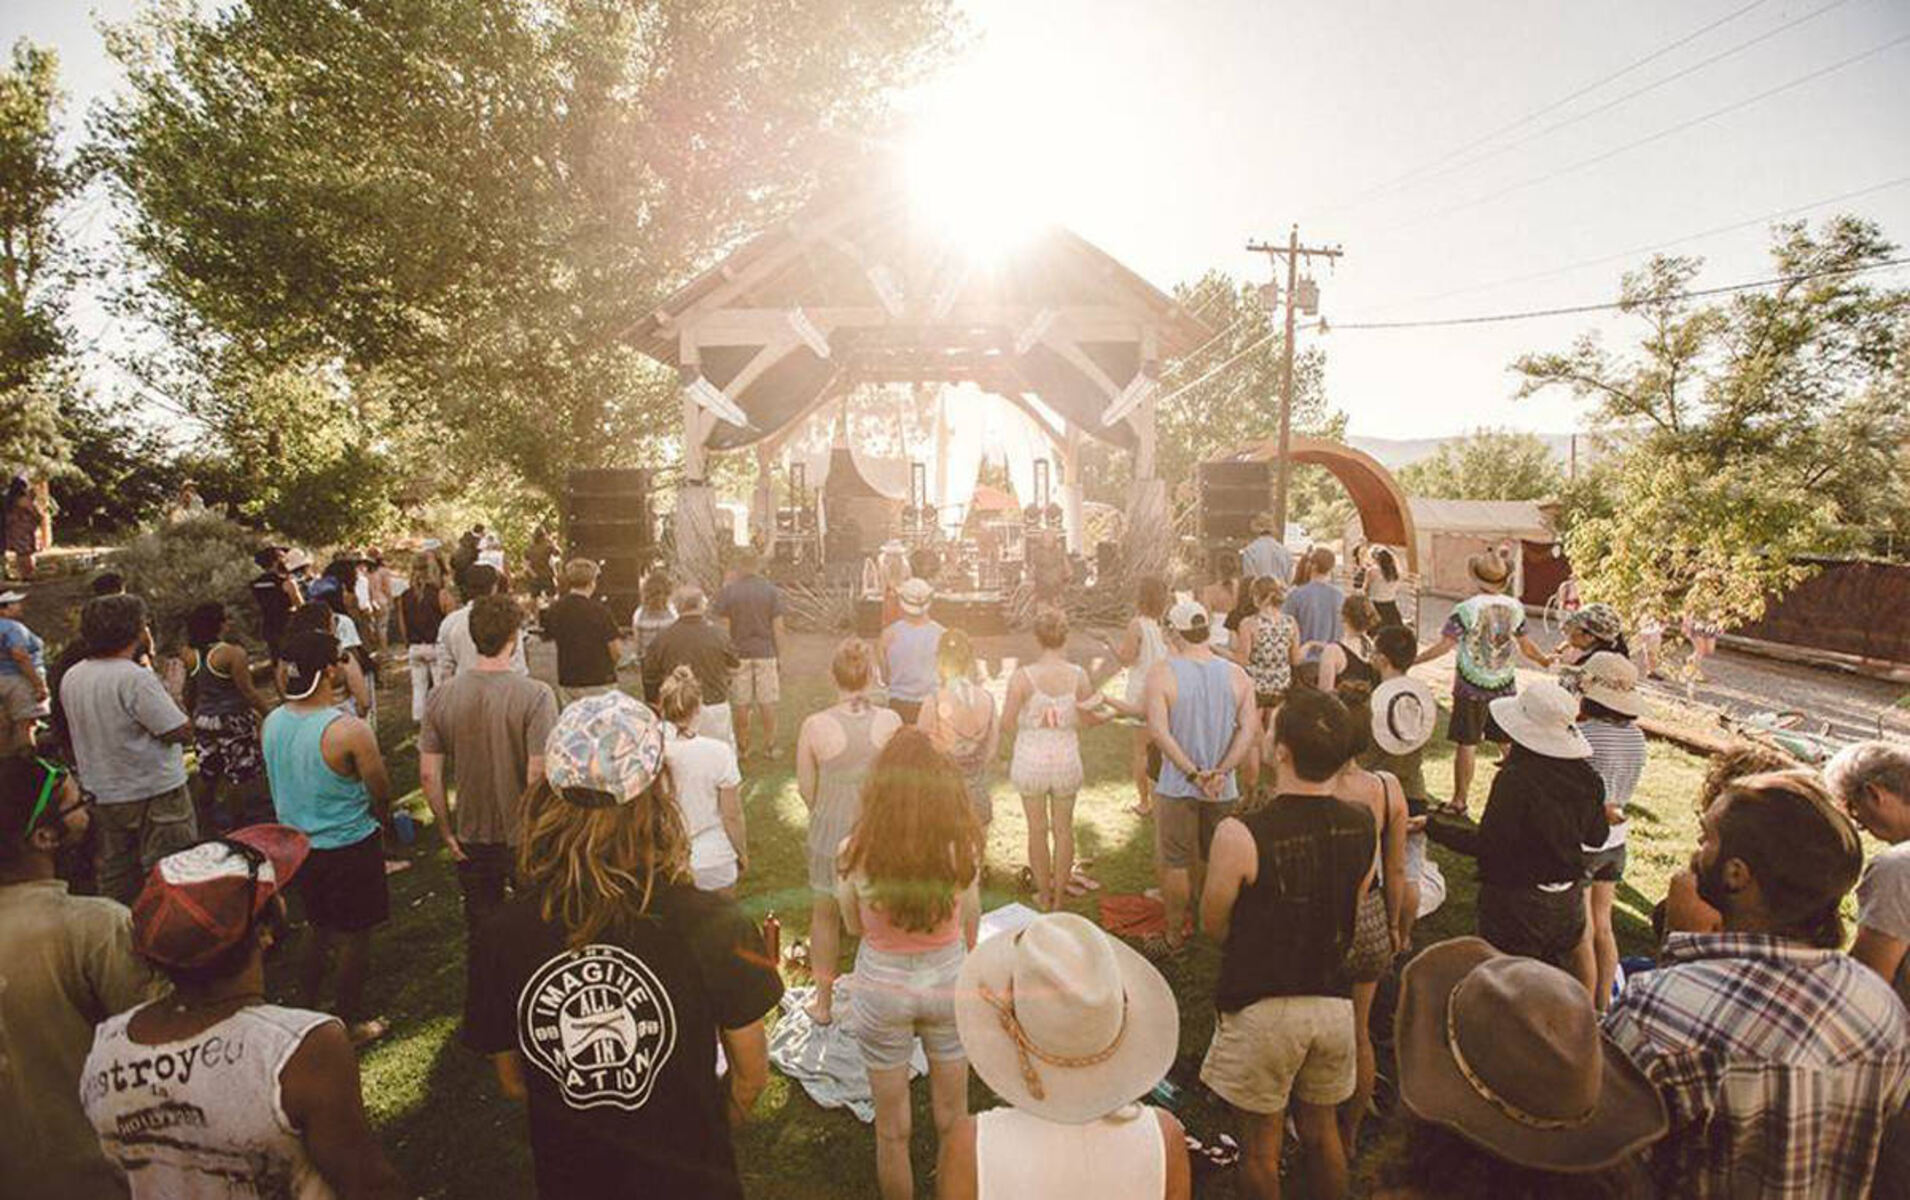 15 Facts About Hot Springs Music Festival